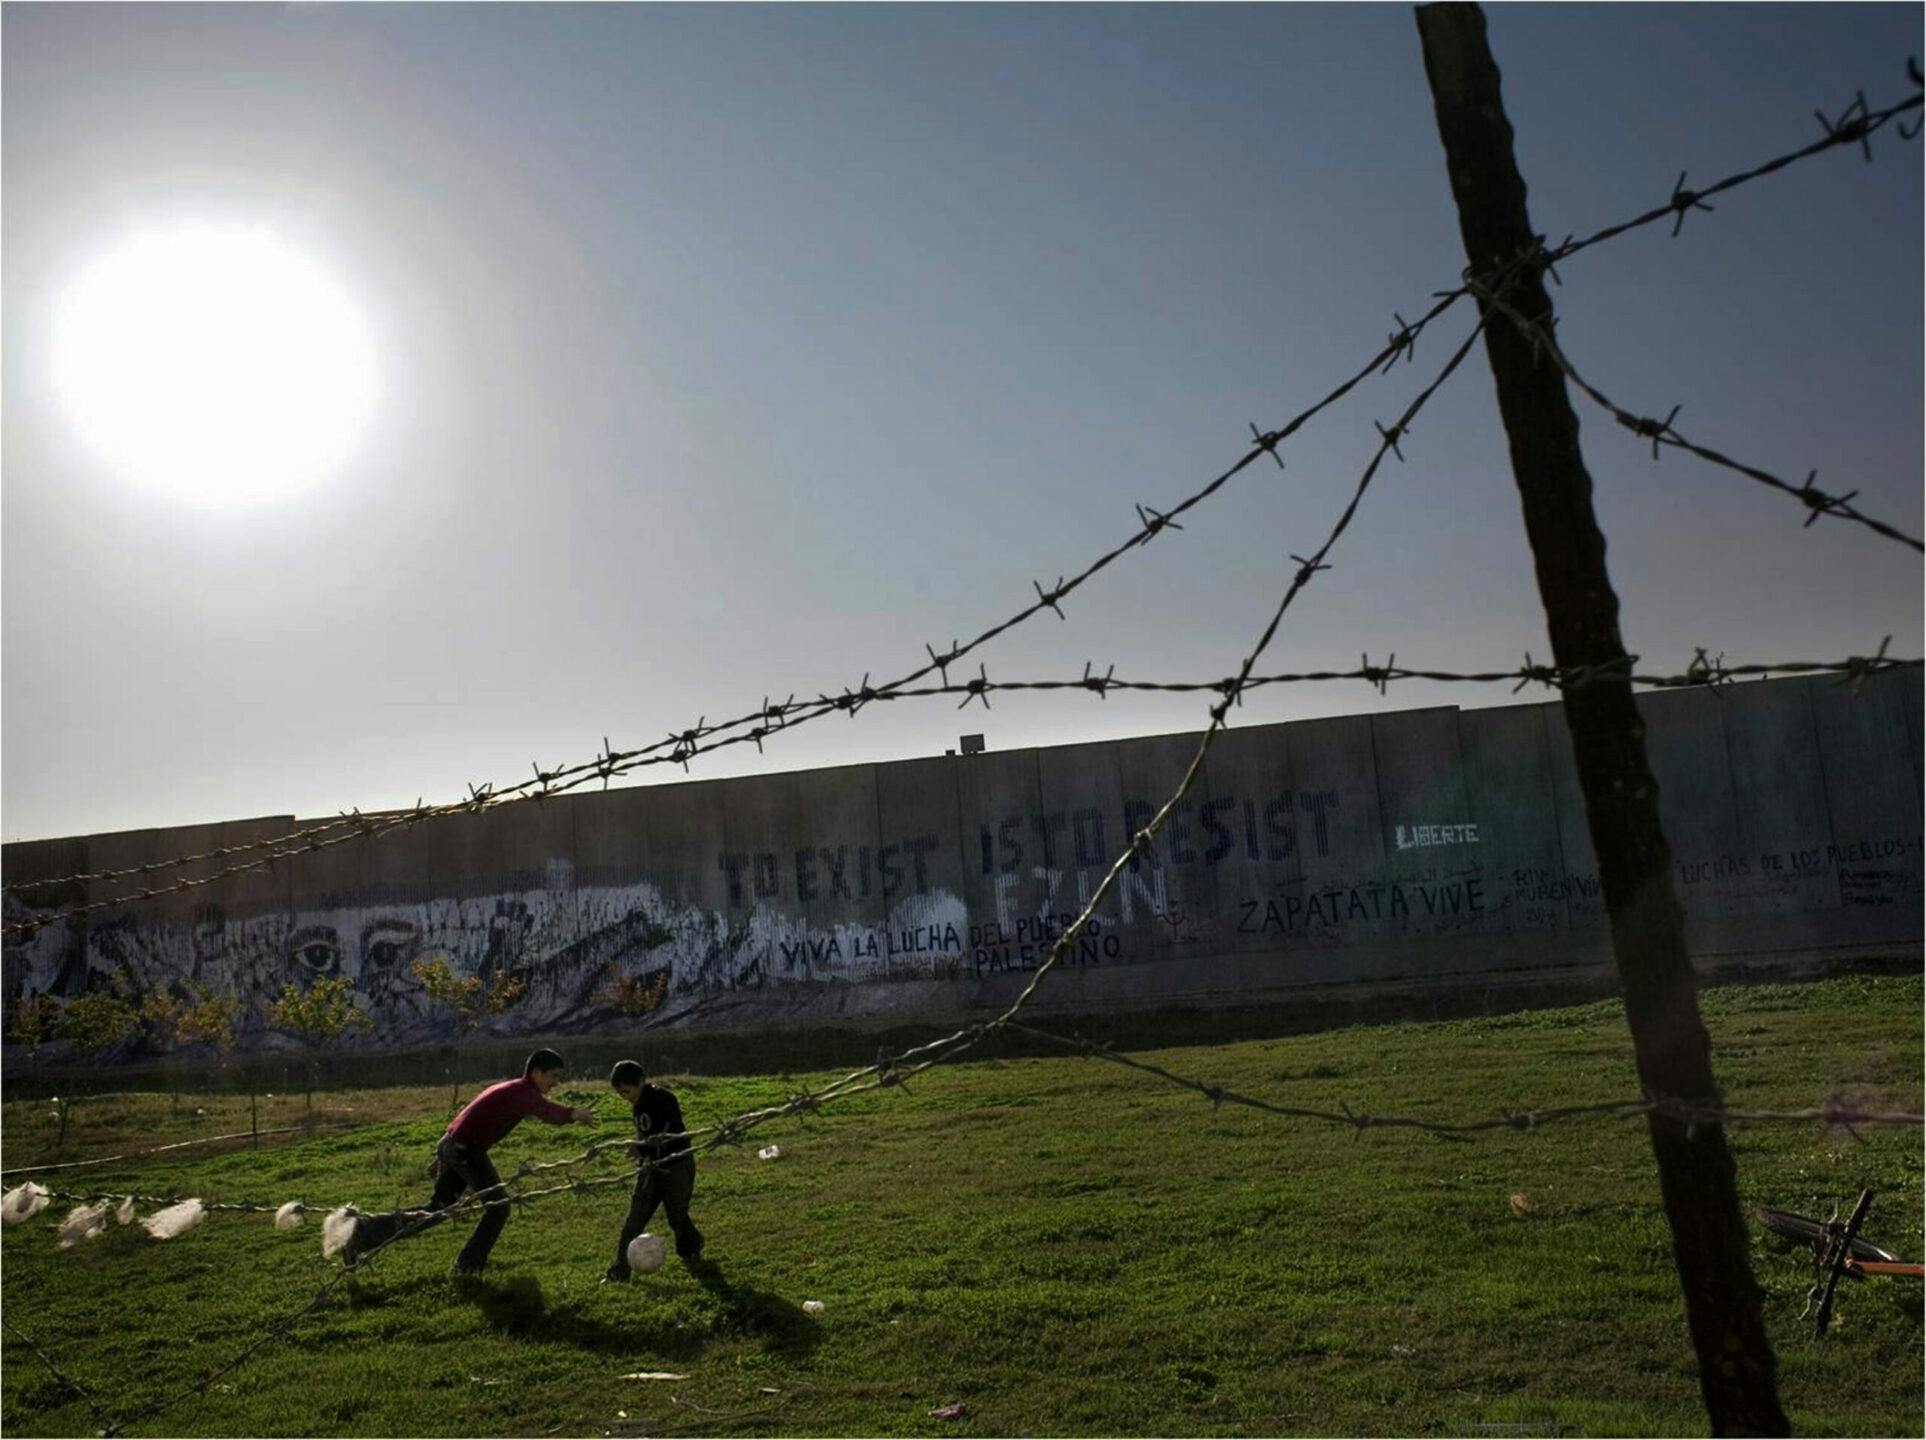 Two boys playing football between barbed wire and a concrete wall.